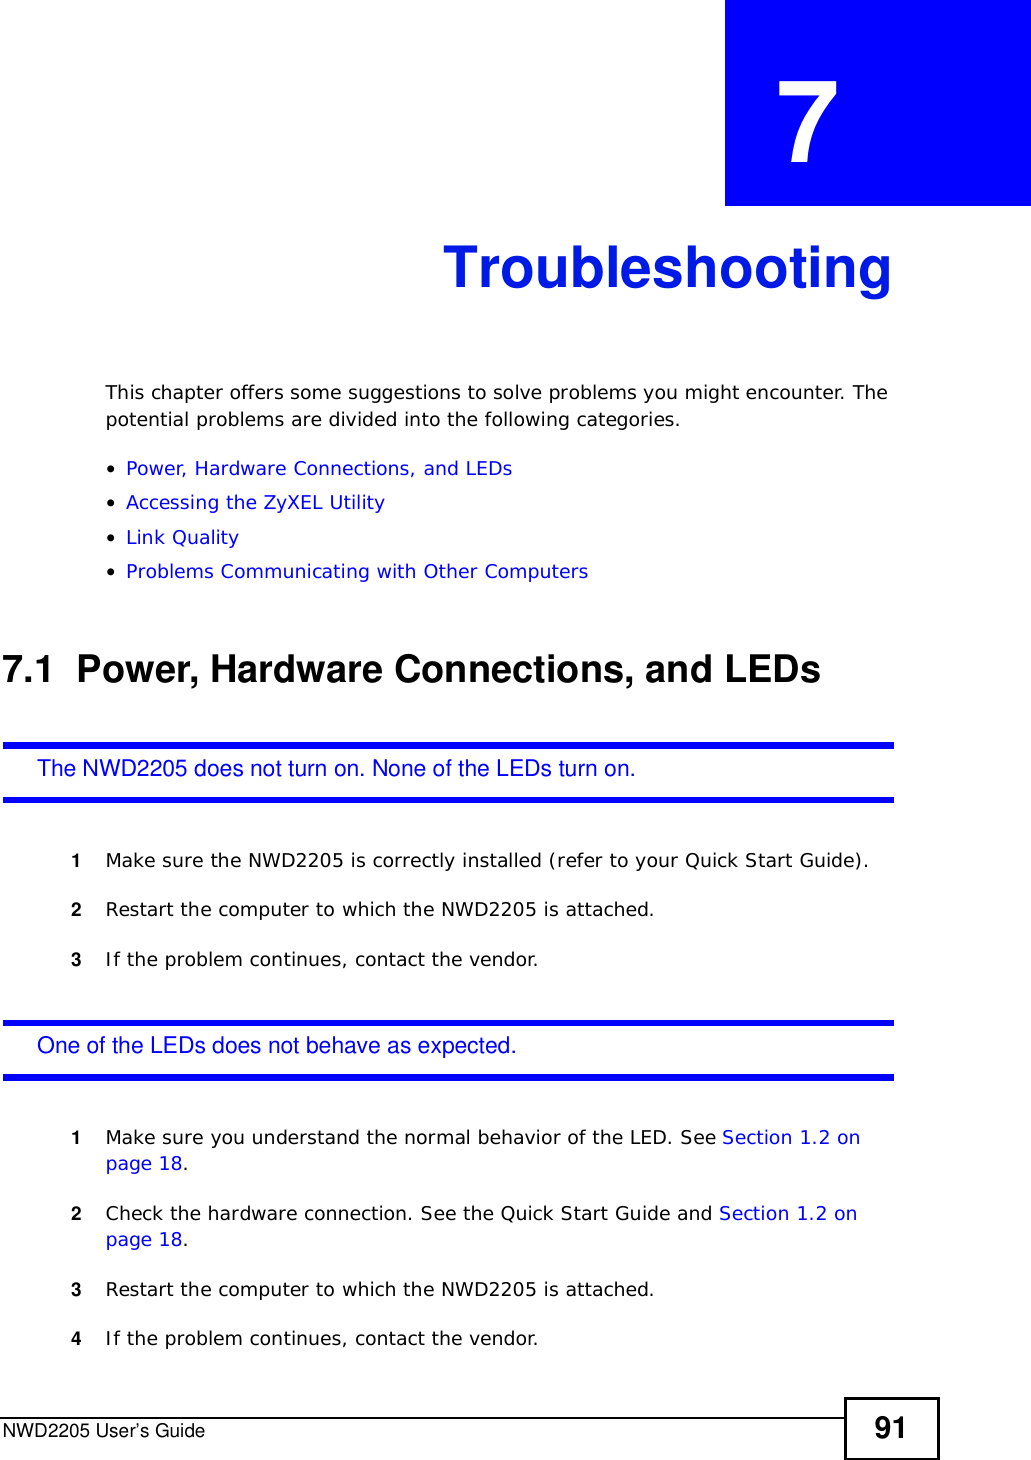 NWD2205 User’s Guide 91CHAPTER  7 TroubleshootingThis chapter offers some suggestions to solve problems you might encounter. The potential problems are divided into the following categories. •Power, Hardware Connections, and LEDs•Accessing the ZyXEL Utility•Link Quality•Problems Communicating with Other Computers7.1  Power, Hardware Connections, and LEDsThe NWD2205 does not turn on. None of the LEDs turn on.1Make sure the NWD2205 is correctly installed (refer to your Quick Start Guide).2Restart the computer to which the NWD2205 is attached.3If the problem continues, contact the vendor.One of the LEDs does not behave as expected.1Make sure you understand the normal behavior of the LED. See Section 1.2 on page 18.2Check the hardware connection. See the Quick Start Guide and Section 1.2 on page 18.3Restart the computer to which the NWD2205 is attached.4If the problem continues, contact the vendor.